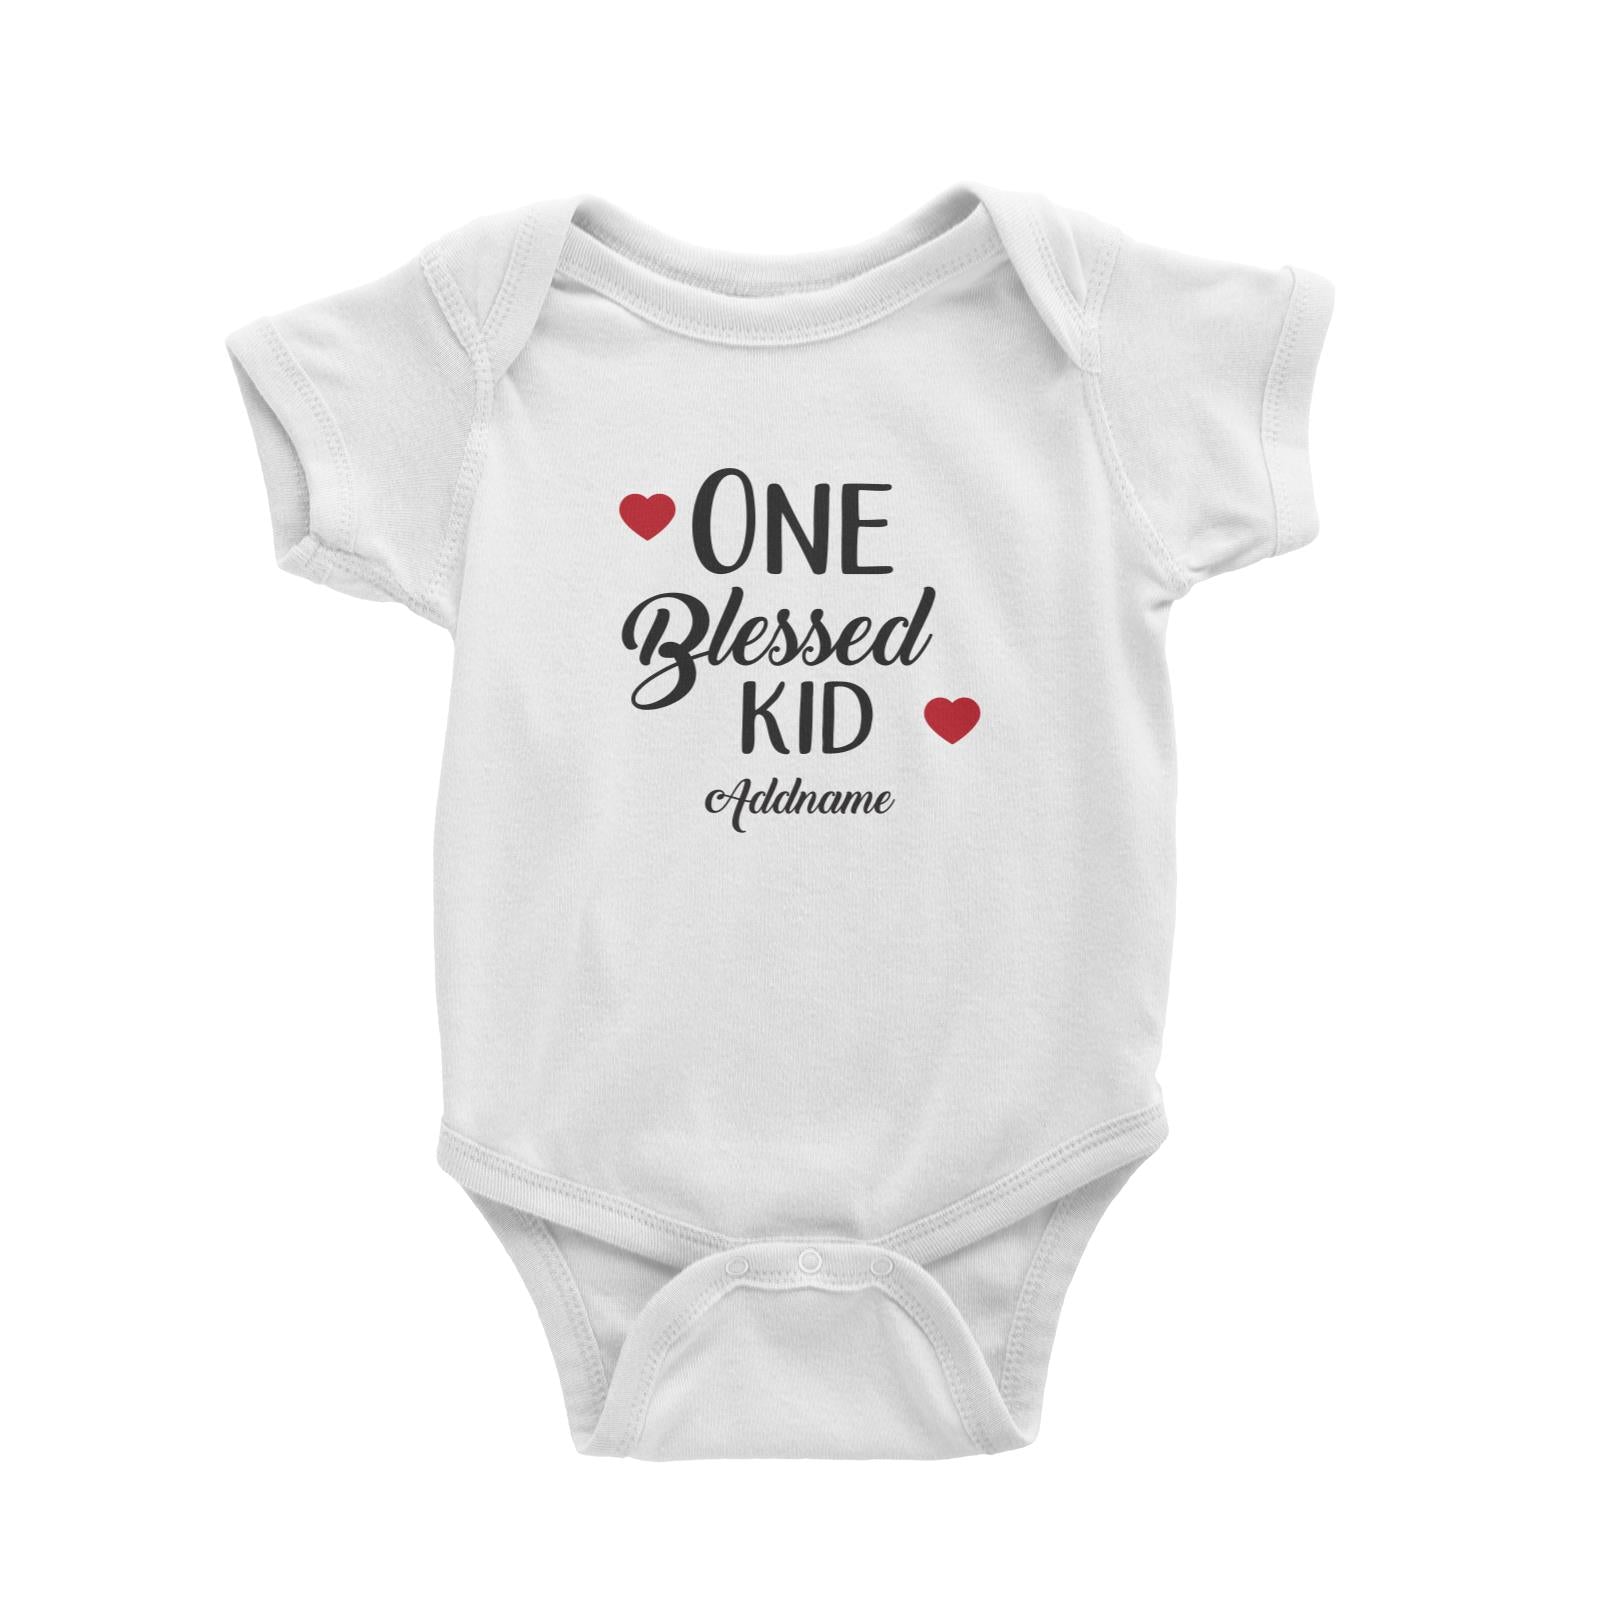 Christian Series One Blessed Kid Addname Baby Romper